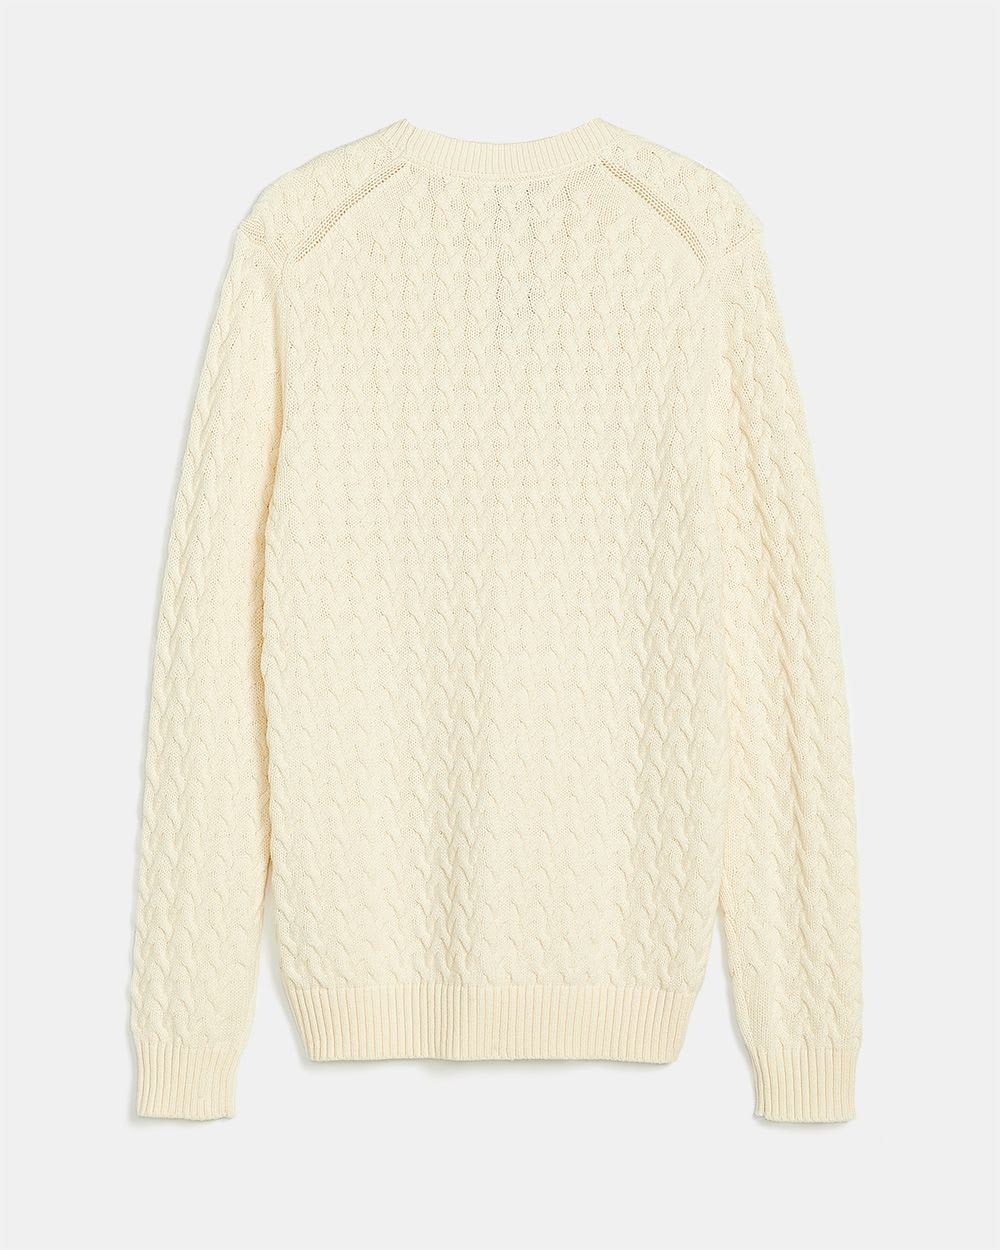 Fancy Cable-Stitch Crew-Neck Sweater